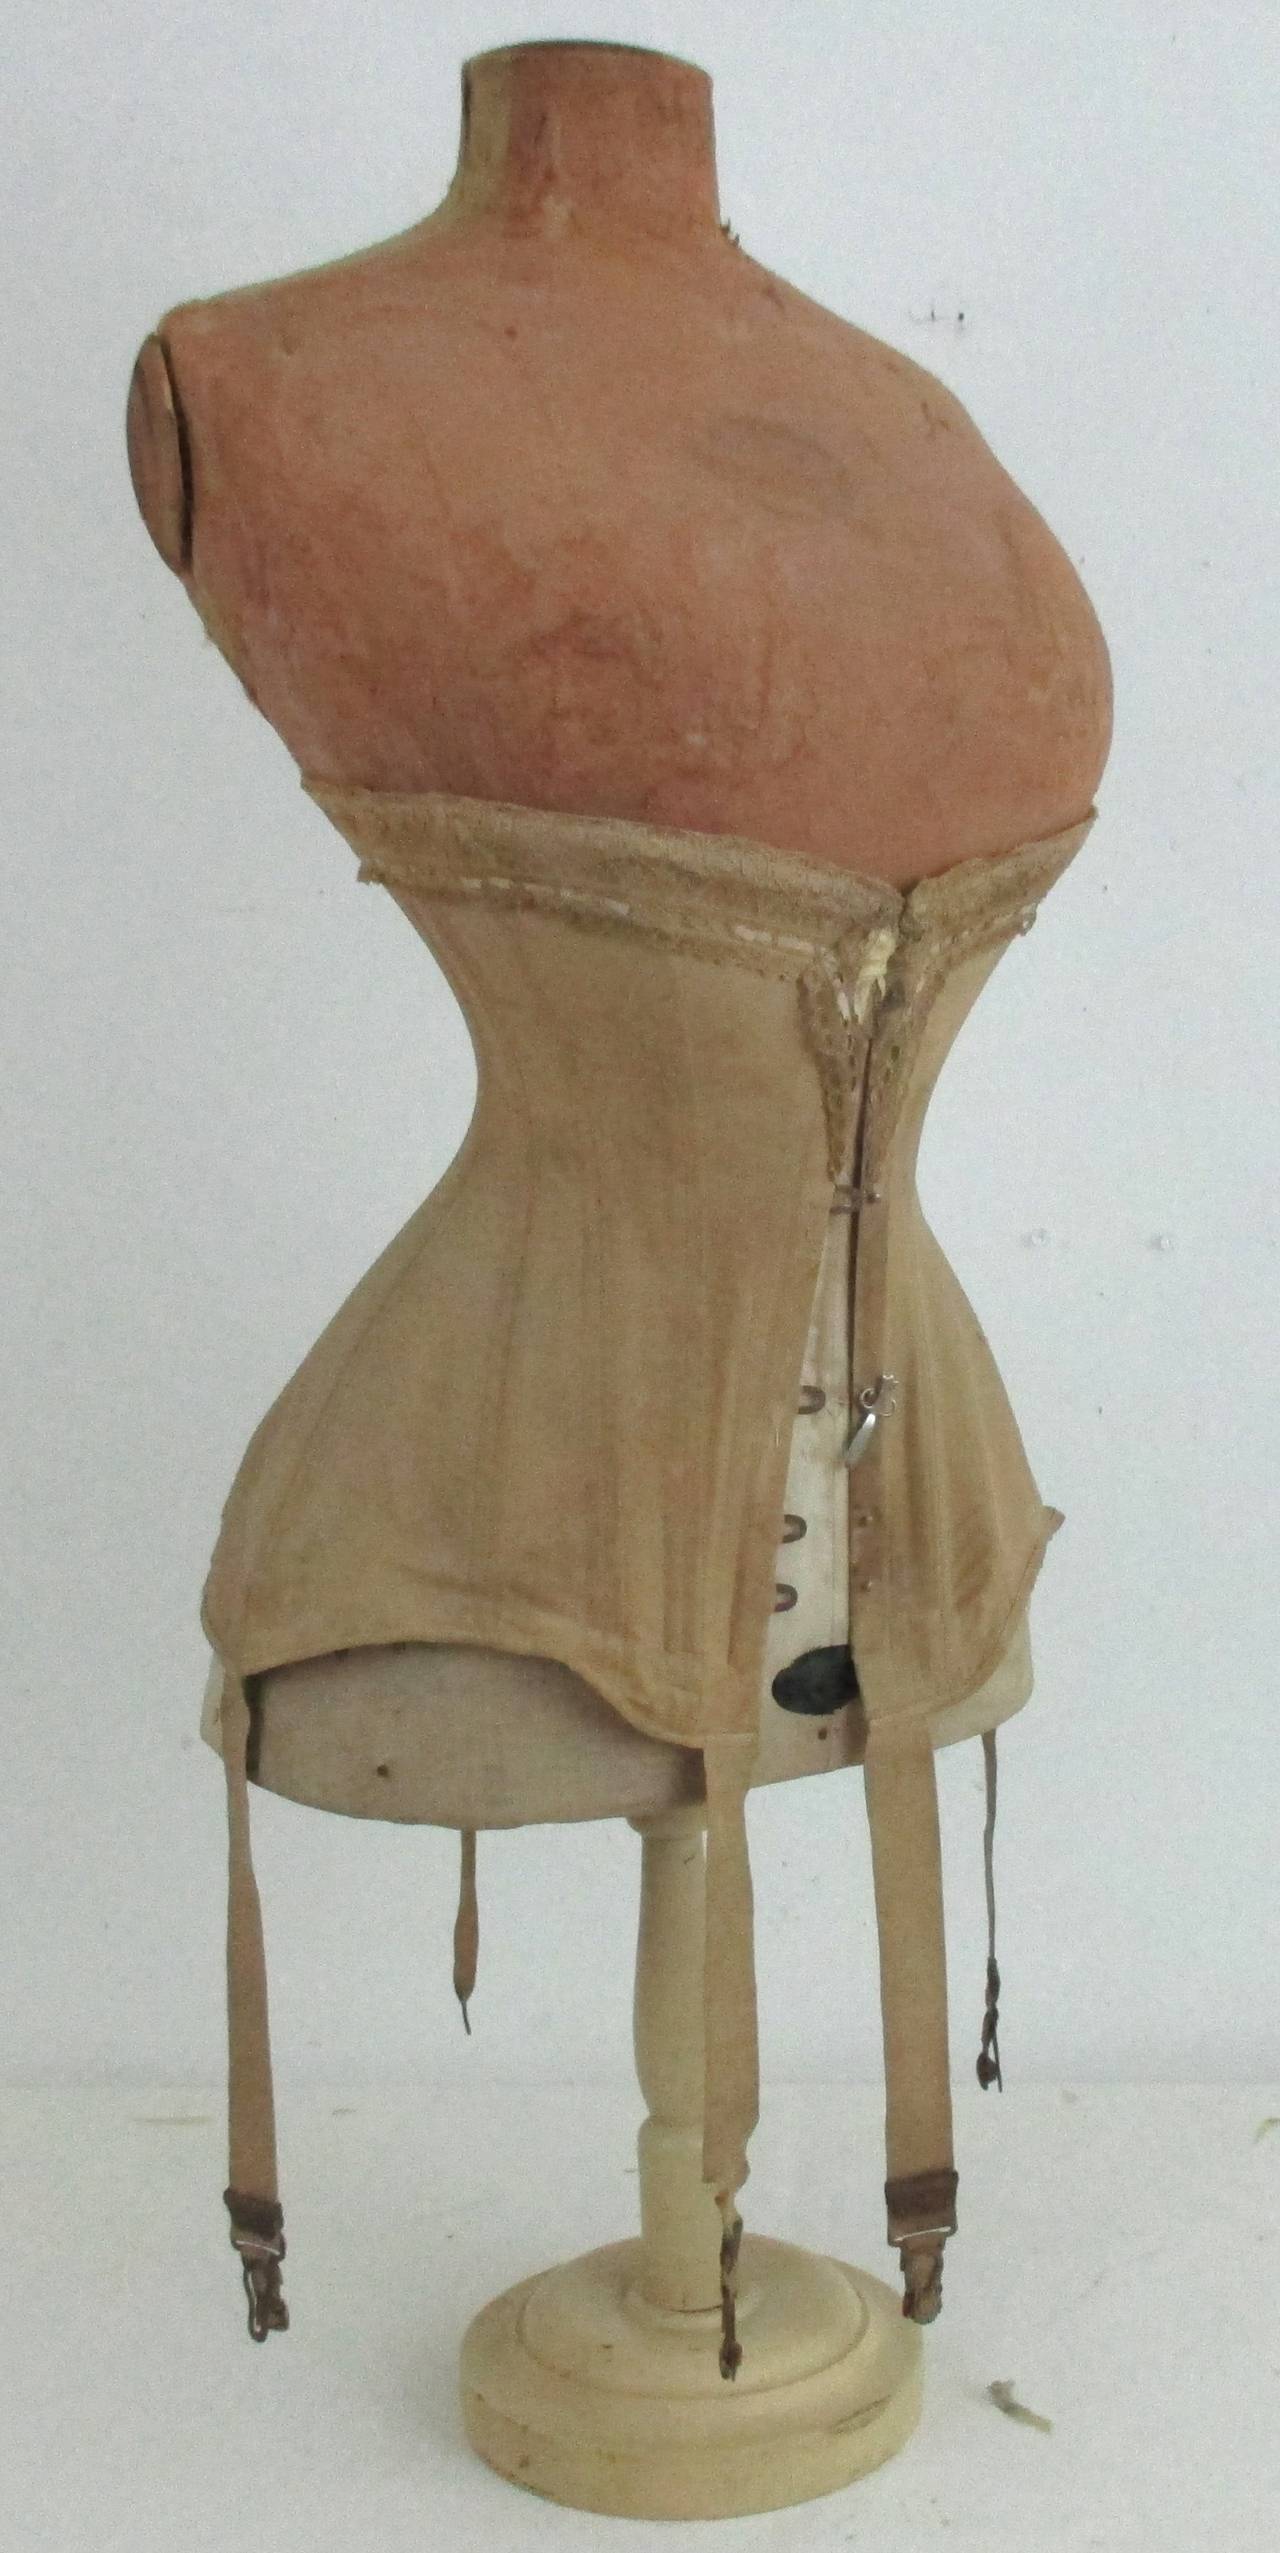 Great 1890's corset and form with the original paper label. Made by the J. Kindliman Form Company 419-420 Broome Street, NY. The papier mache had/has a fabric covering, much of this is missing but that doesn't alter the overall interest of this